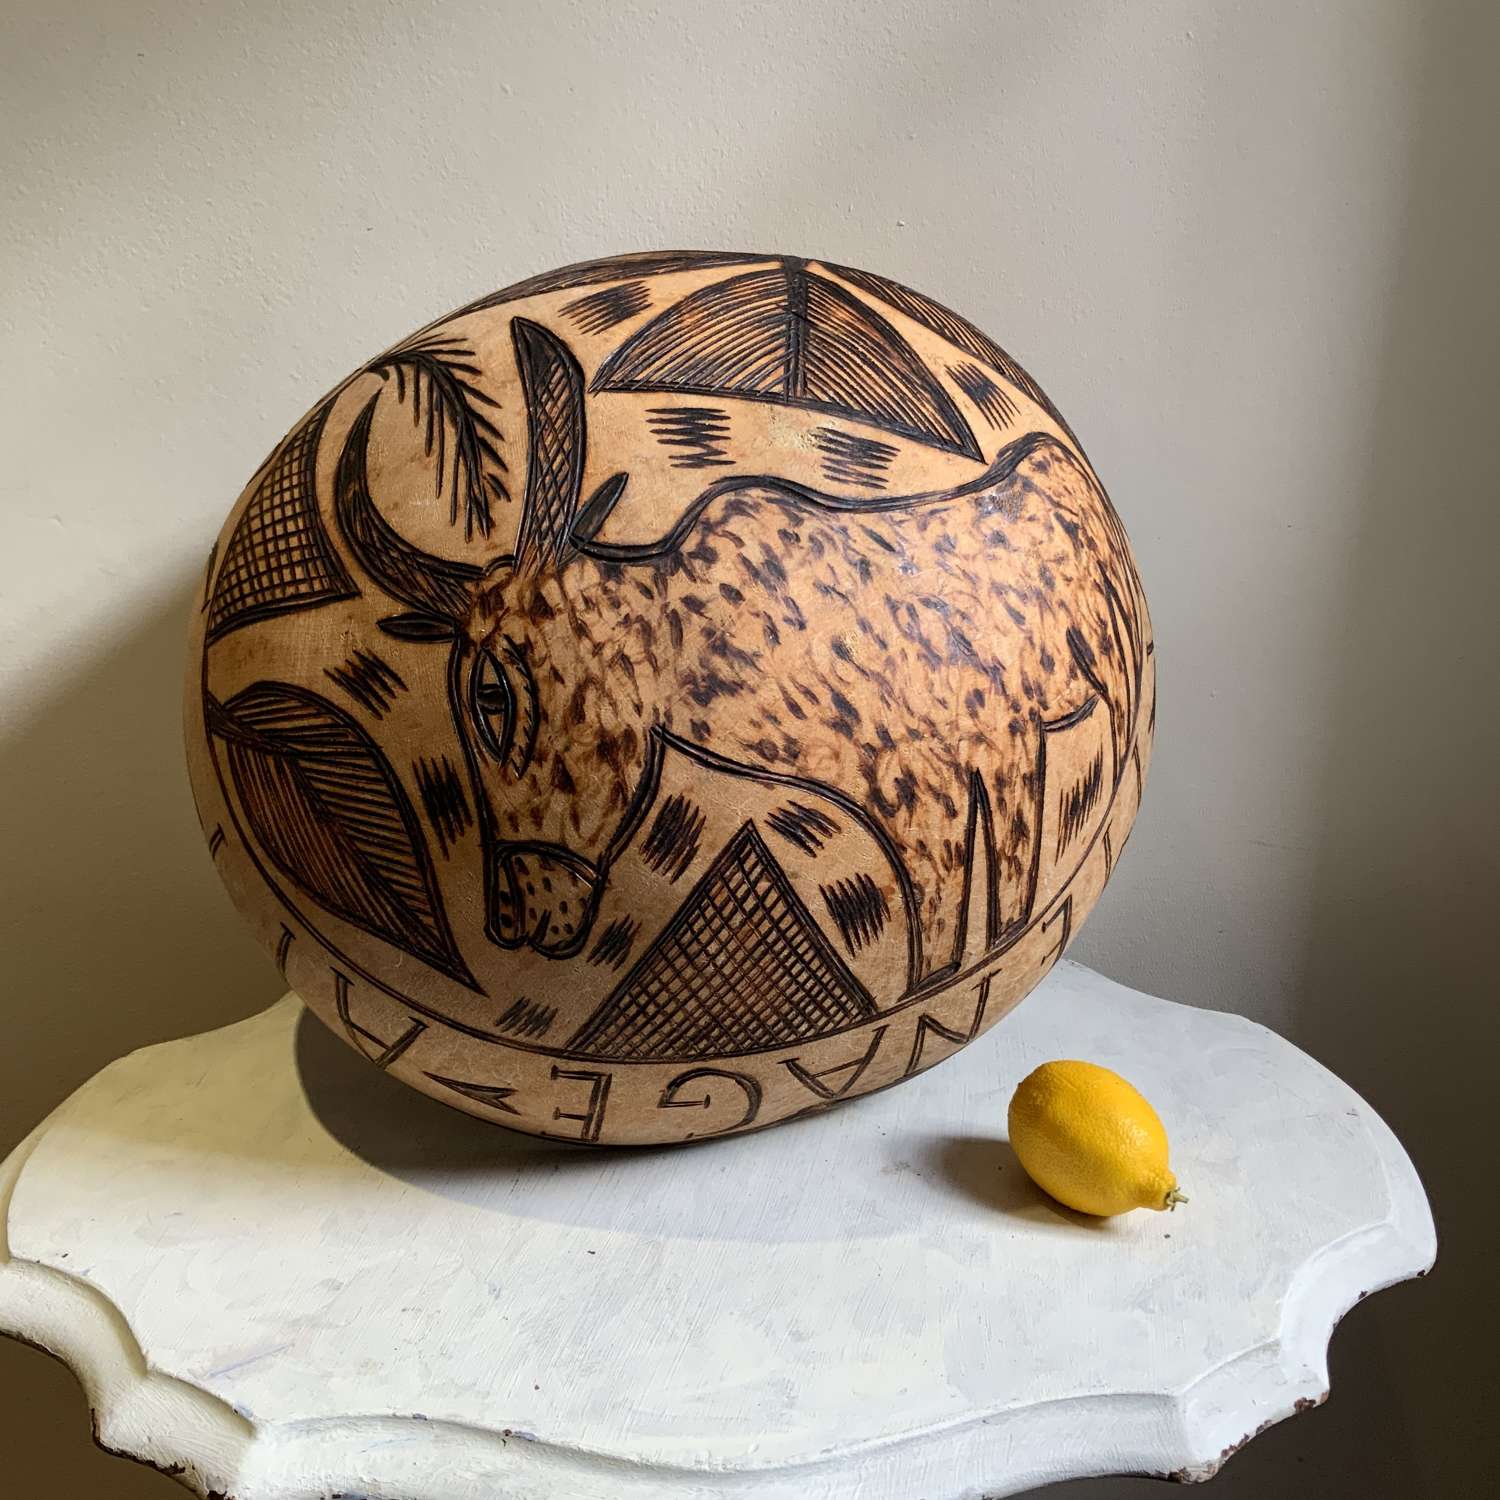 Giant Calabash Gourd Bowl With Roan Antelope Pyrography Decoration